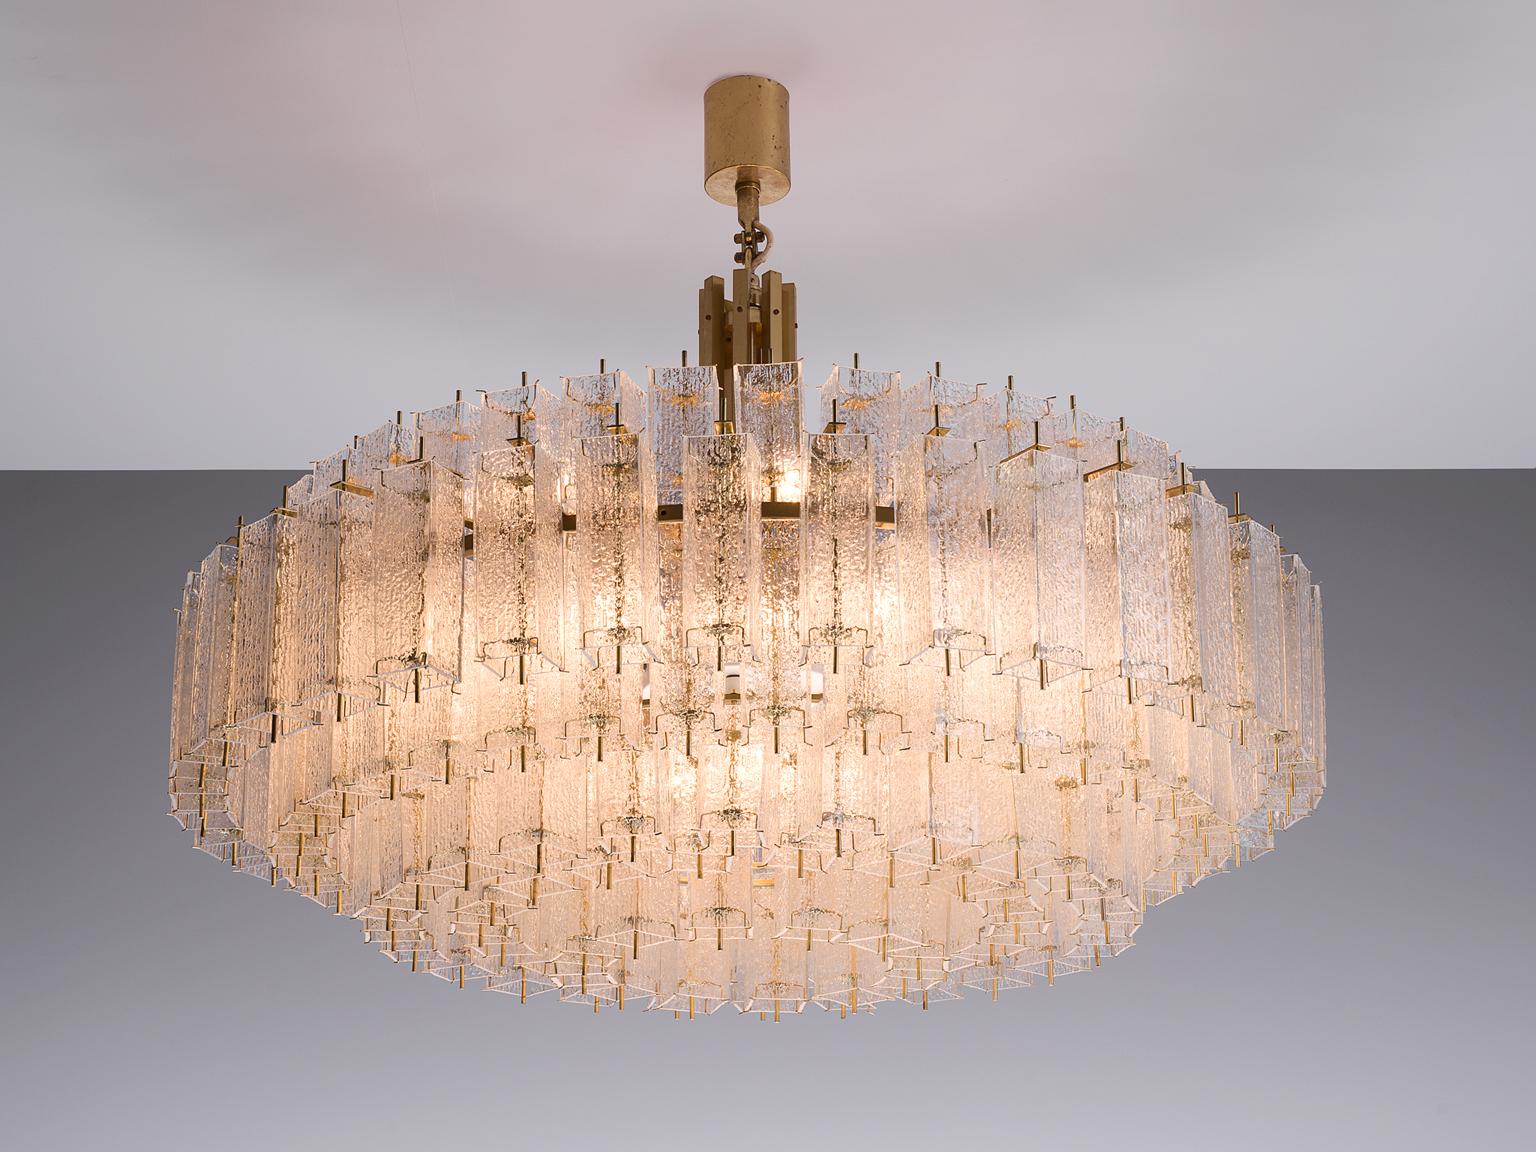 Chandelier, glass and brass, Europe, 1970s

Breathtaking chandelier made in Europe in the 1970s. This grand piece is very luxurious in its appearance and quickly catches the eye of the viewer. This circular piece measures 155cm/5.1ft and displays